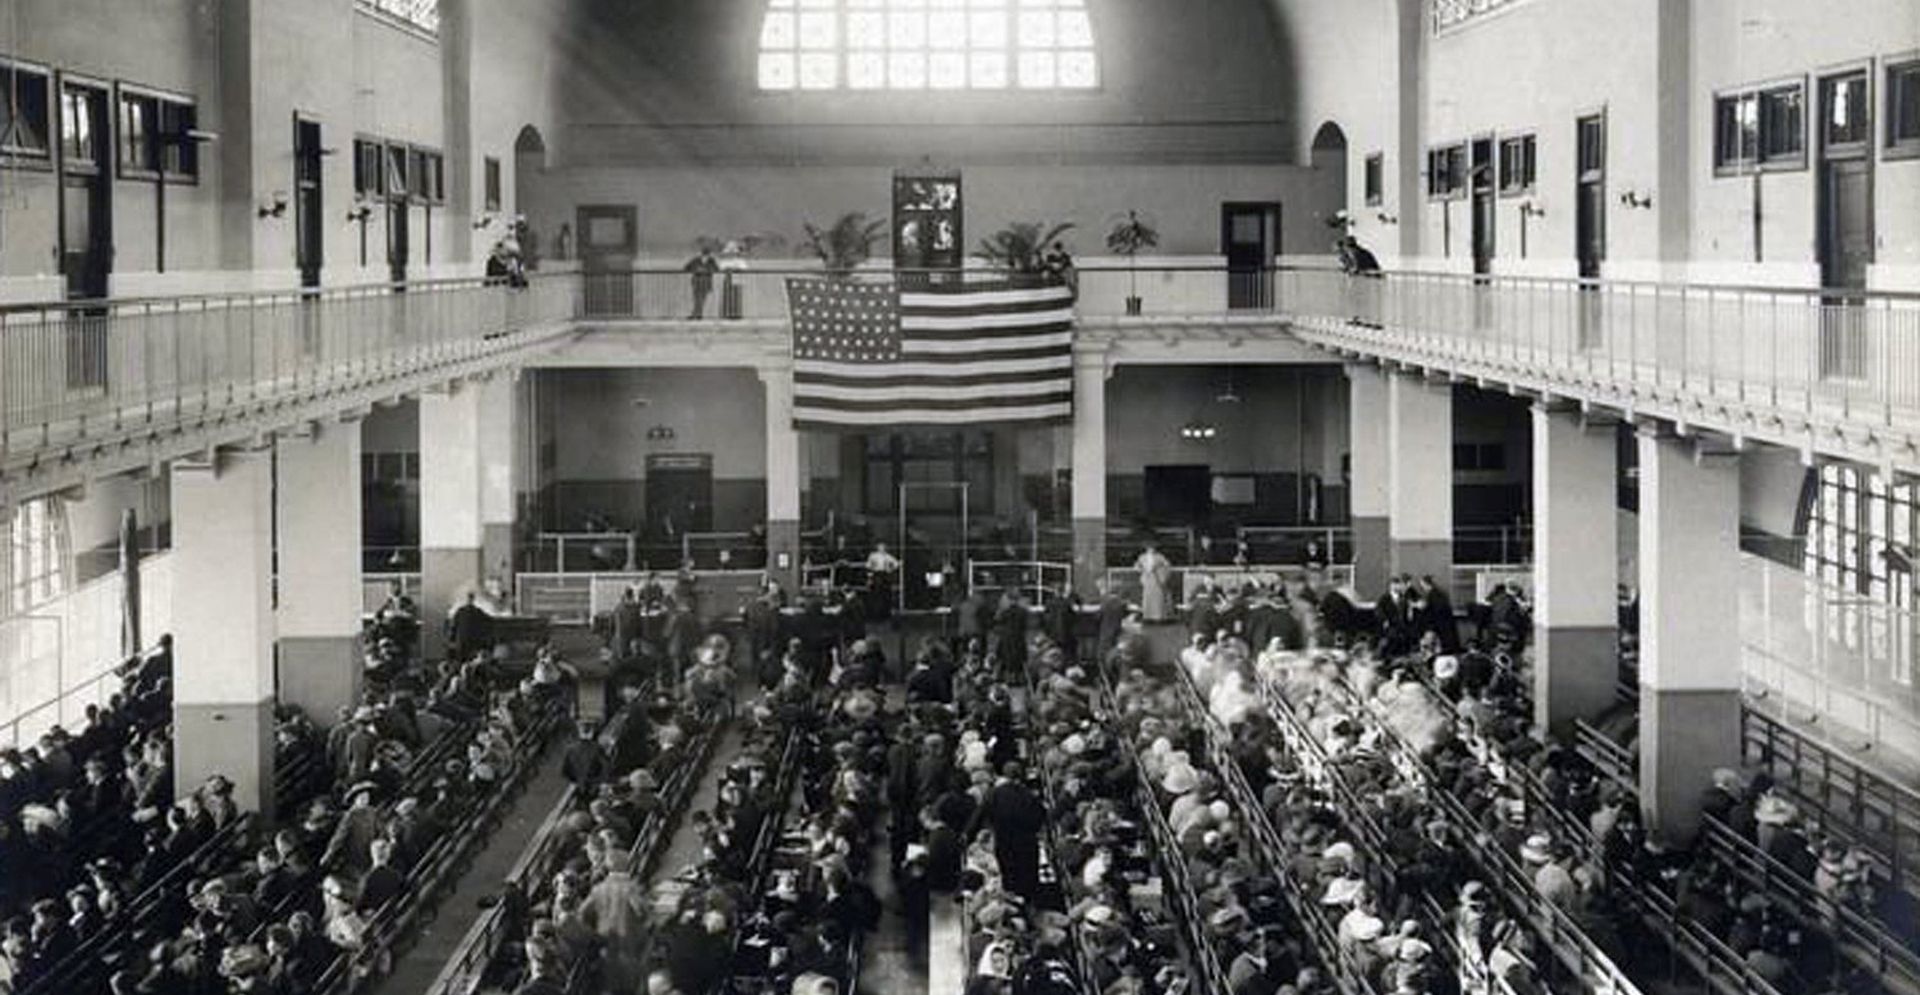 epa05780264 An undated handout photo made available by the US National Parks Service (NPS) showing the Registry Room on Ellis Island, in Upper New York Bay, New York, USA, as immigrants await the legal inspection trying to make it into America. Reports state on 09 February 2017 that the 9th Circuit Court of Appeals, in San Francisco, California, is considering arguments over lifting a temporary halt to President Donald Trump's controversial travel ban, from seven predominantly Muslim countries, where a decision will be reached this week.  EPA/NPS HANDOUT MANDATRY CREDIT: NPS HANDOUT EDITORIAL USE ONLY/NO SALES